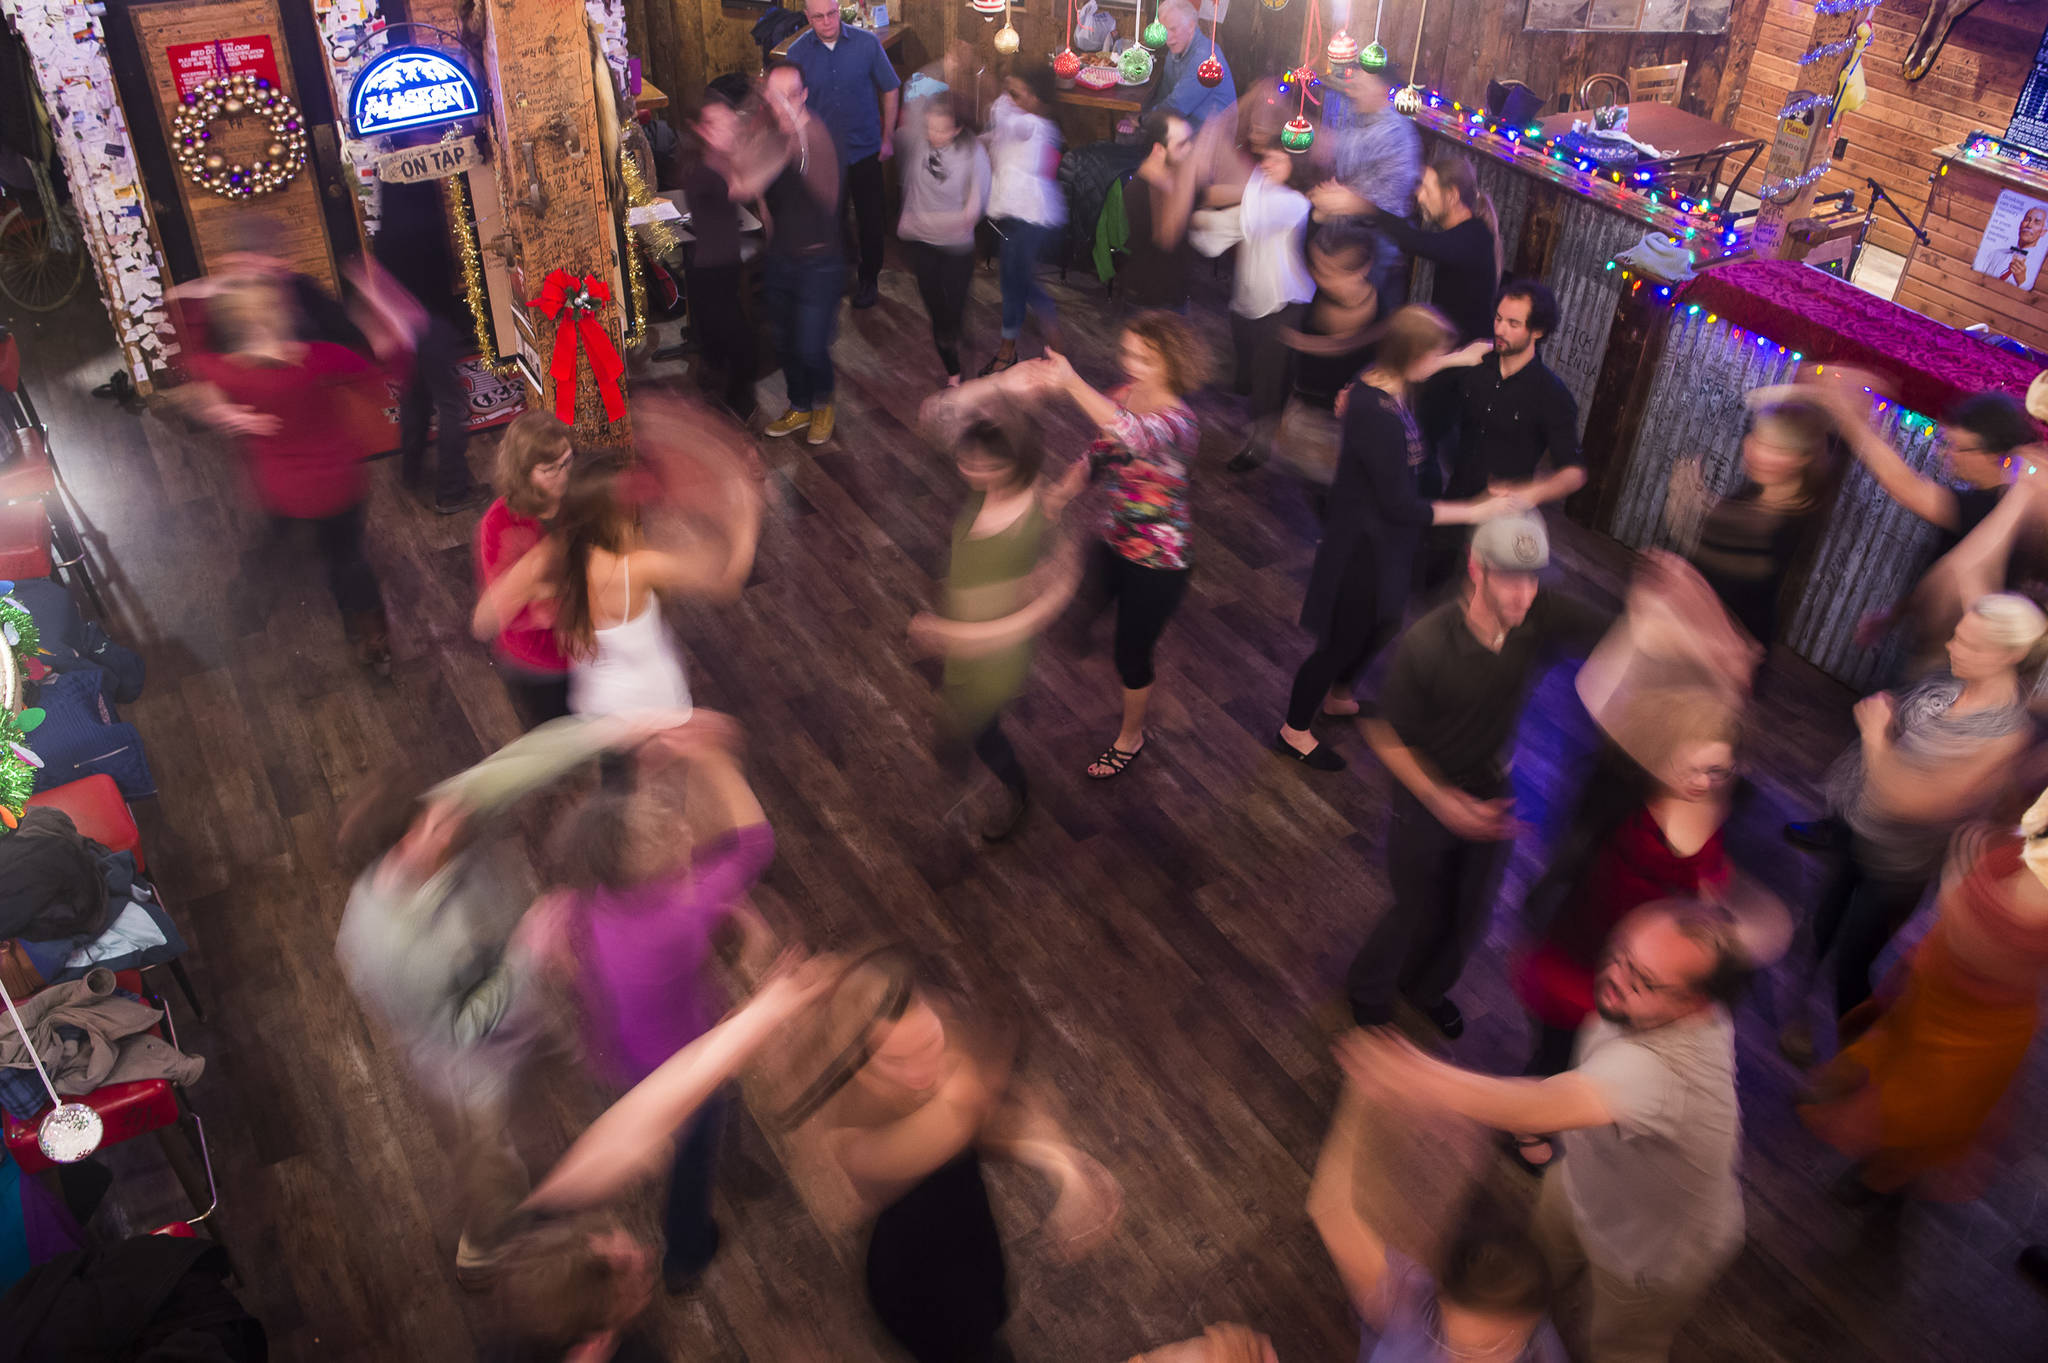 Heather Haugland teaches a salsa workshop at the Red Dog Saloon on Wednesday, Dec. 5, 2018. (Michael Penn | Juneau Empire)